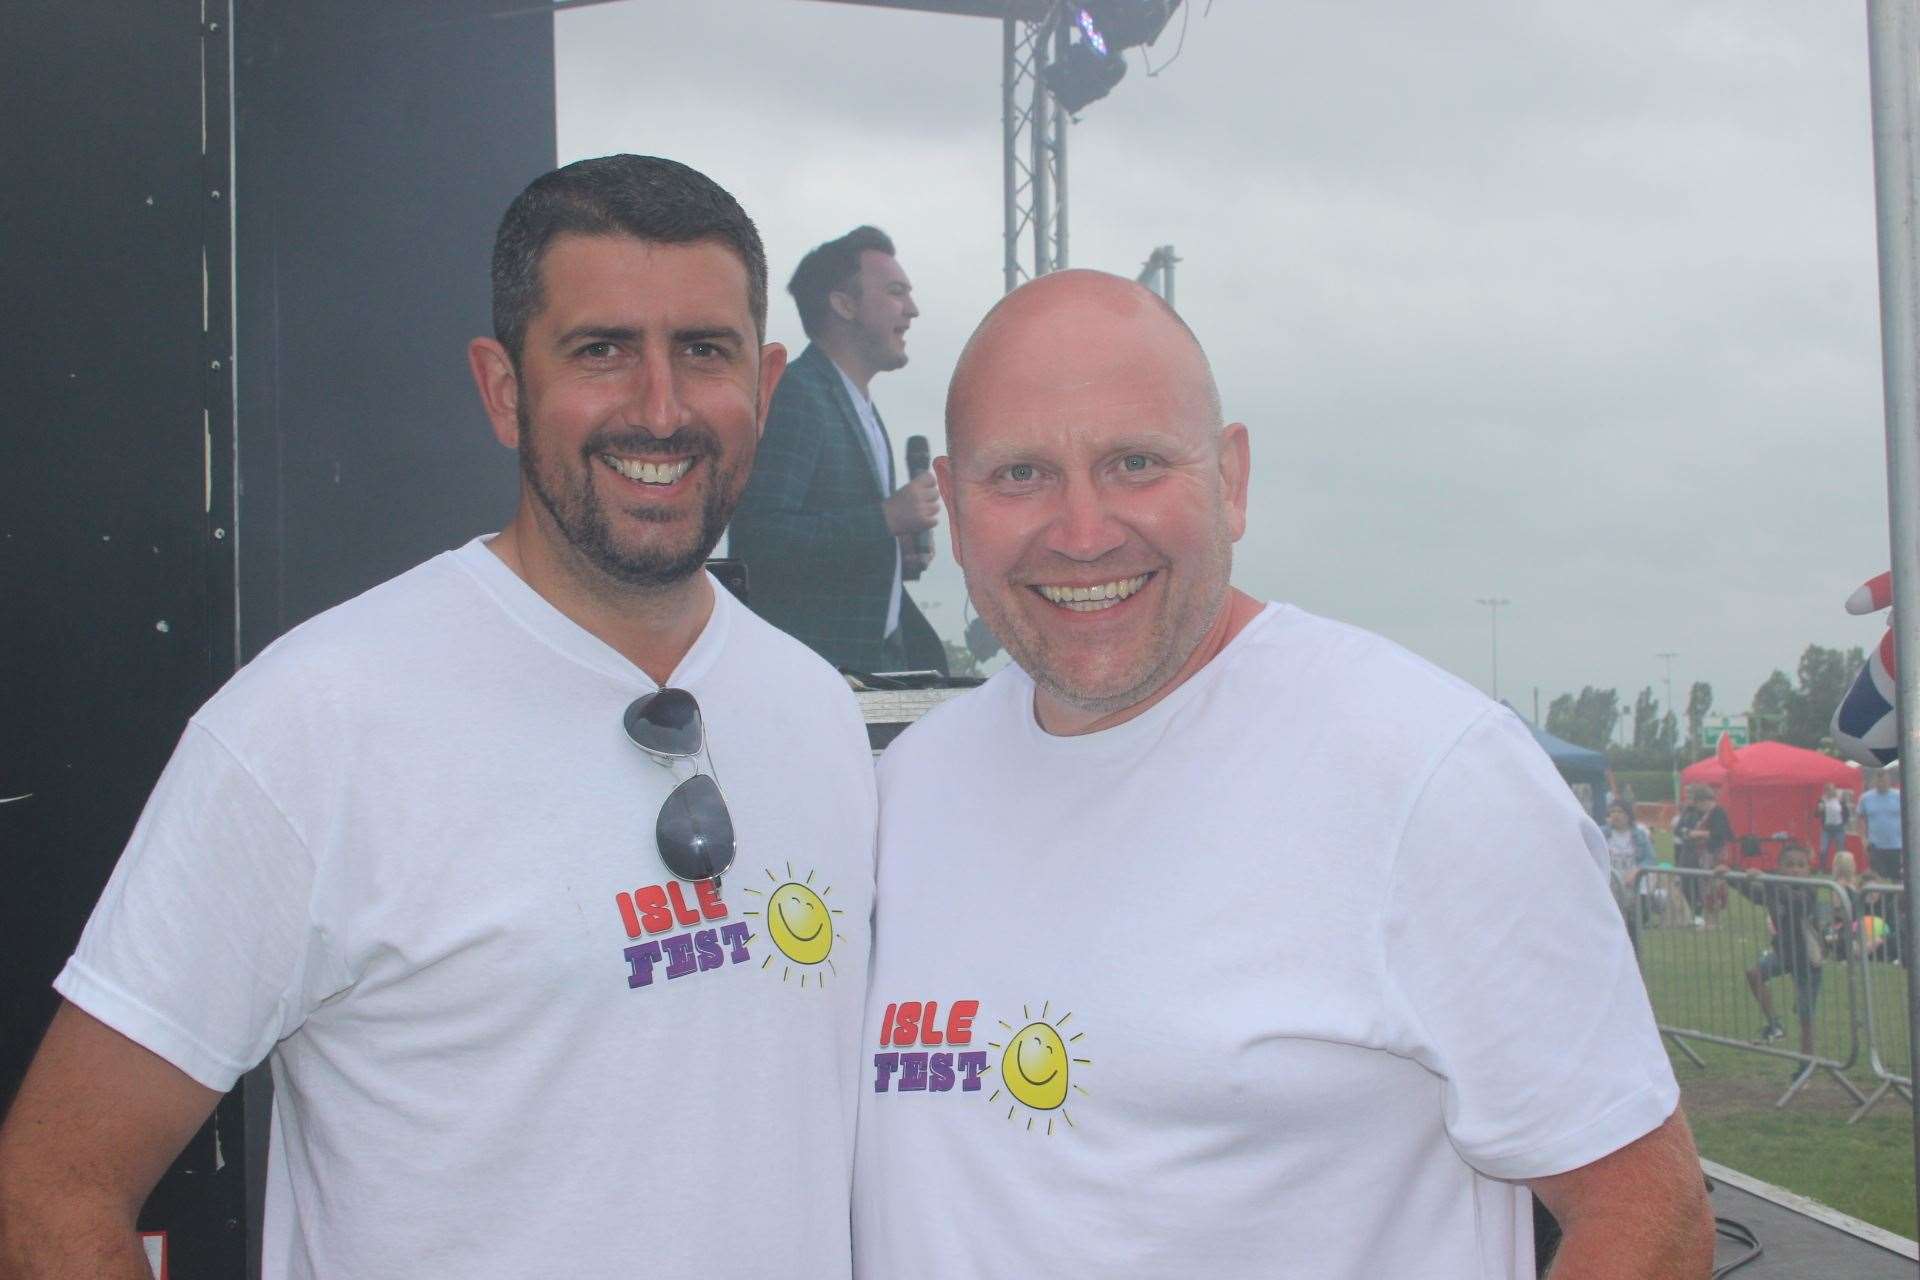 Sheppey IsleFest organisers Marc Layton, left, and Paul Rogers. Picture: John Nurden (11228761)